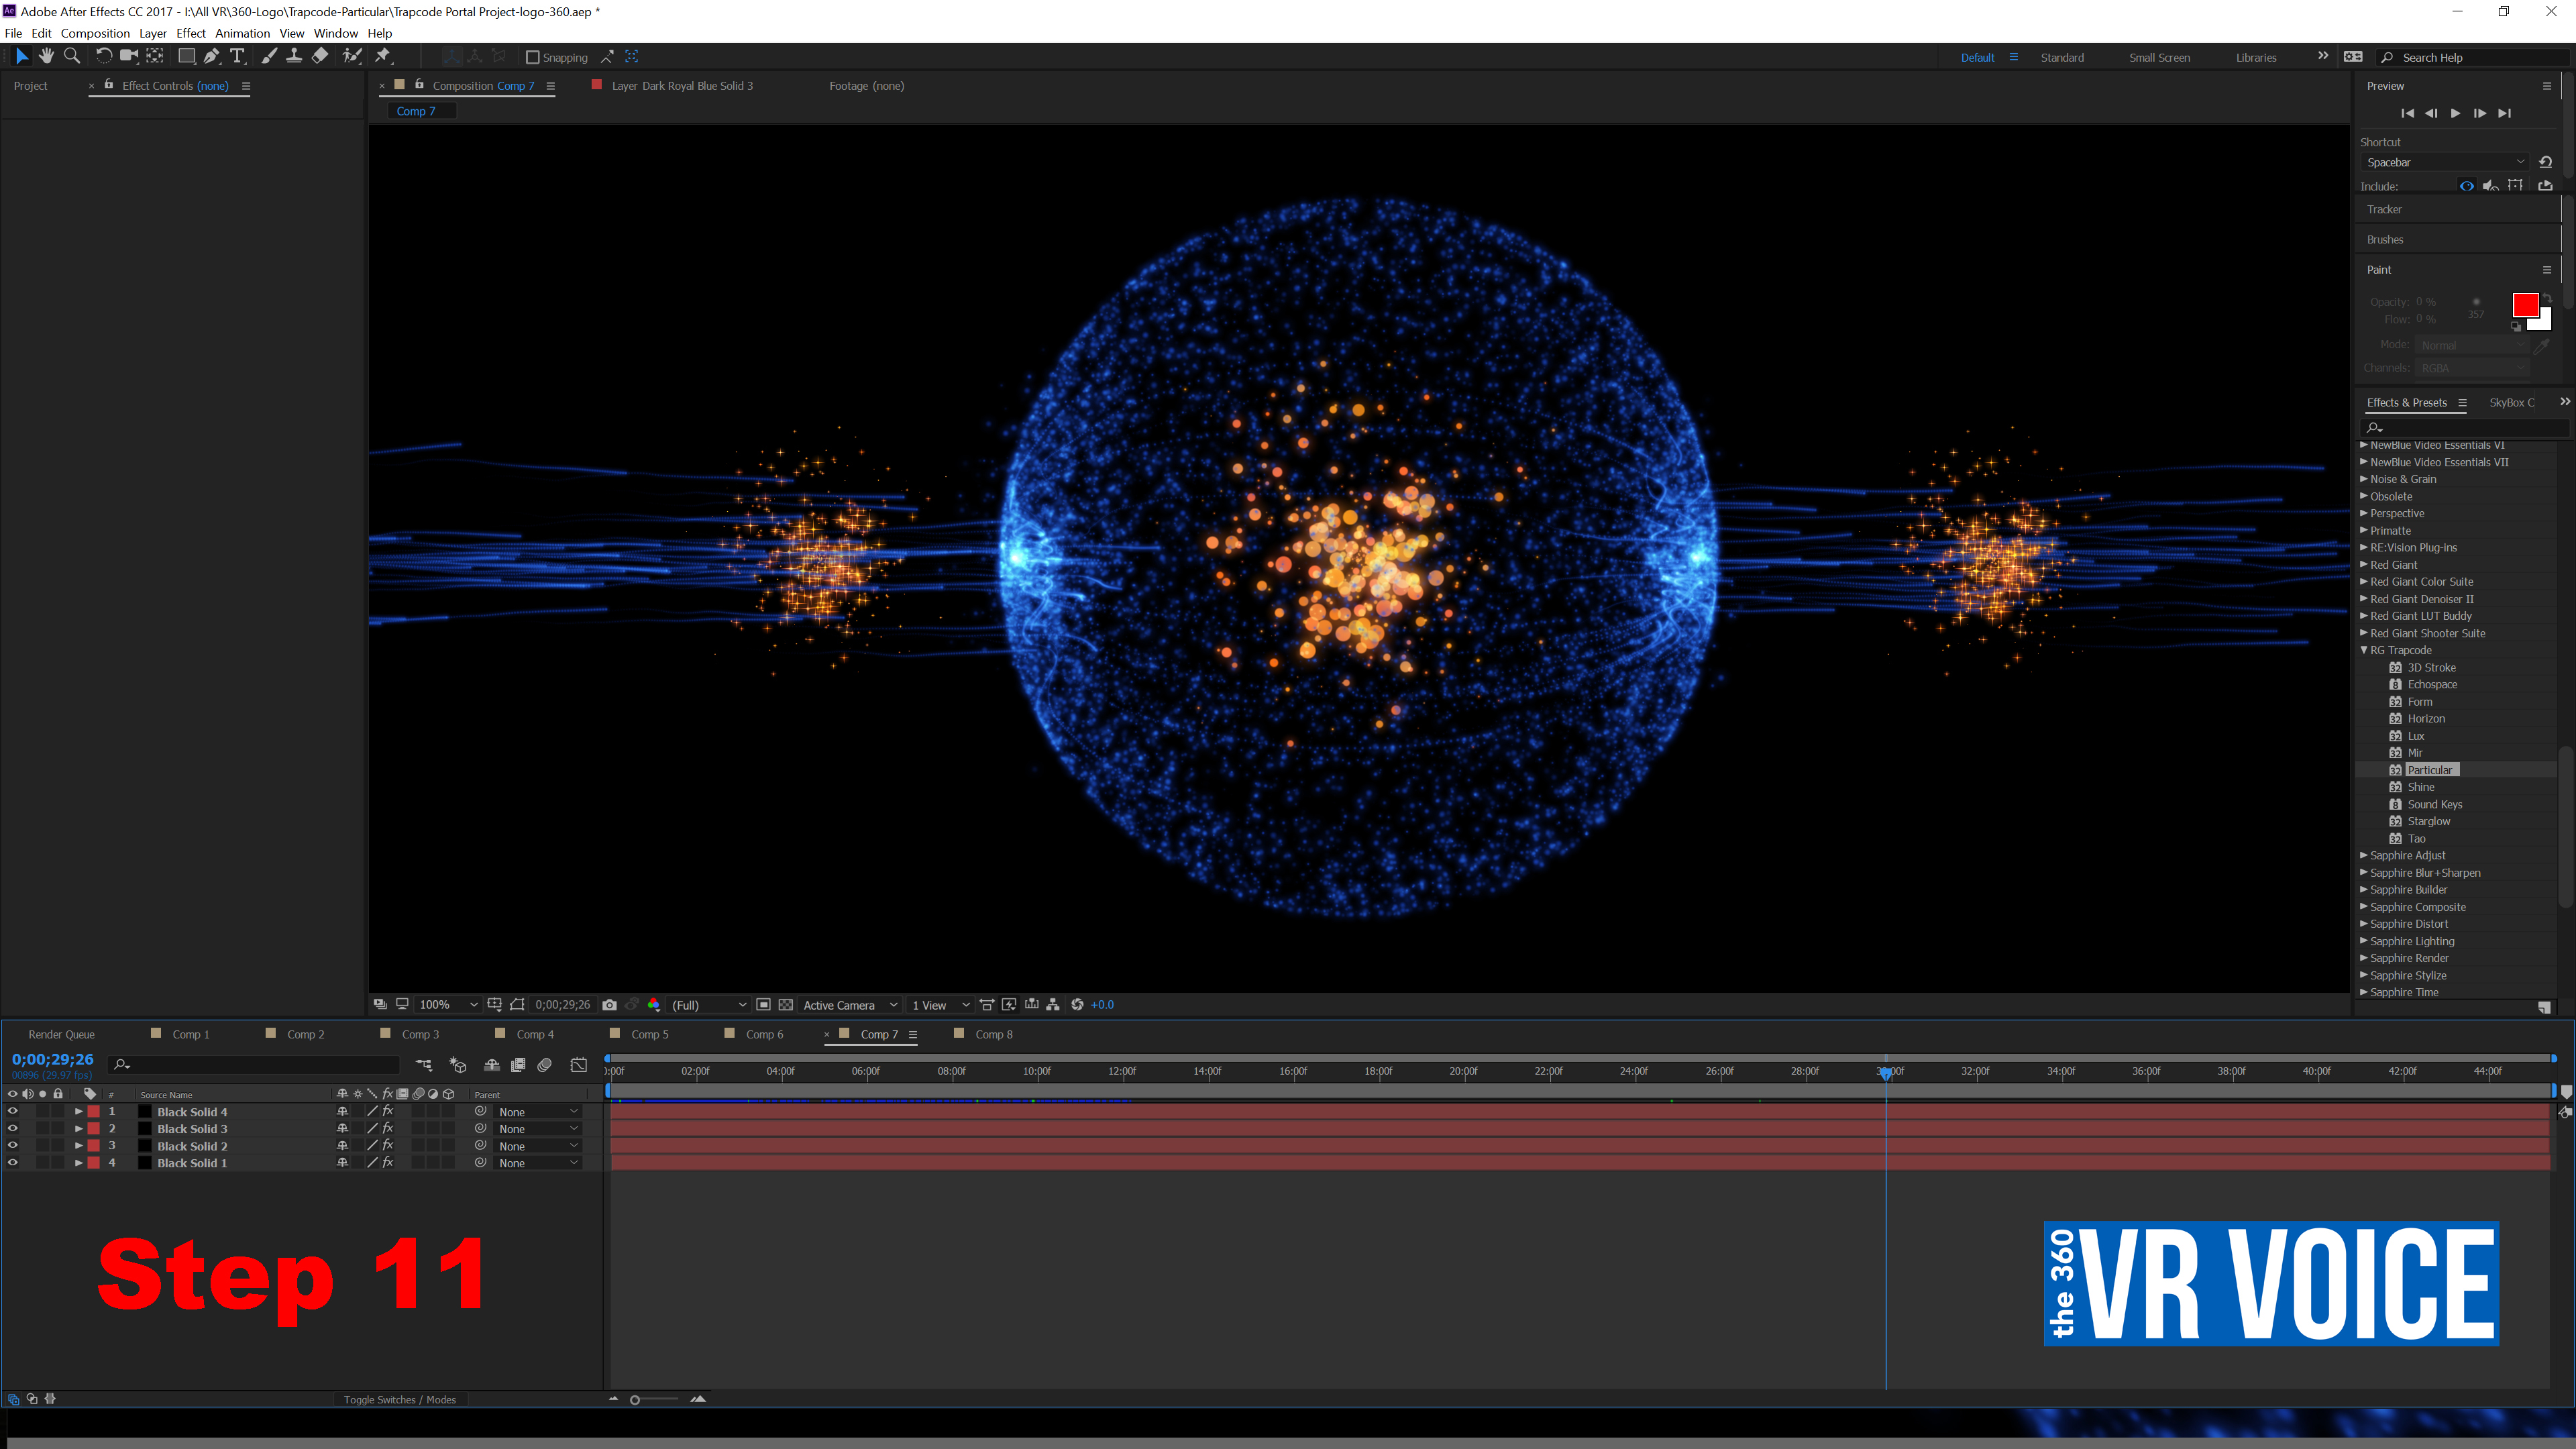 trapcode after effects download mac